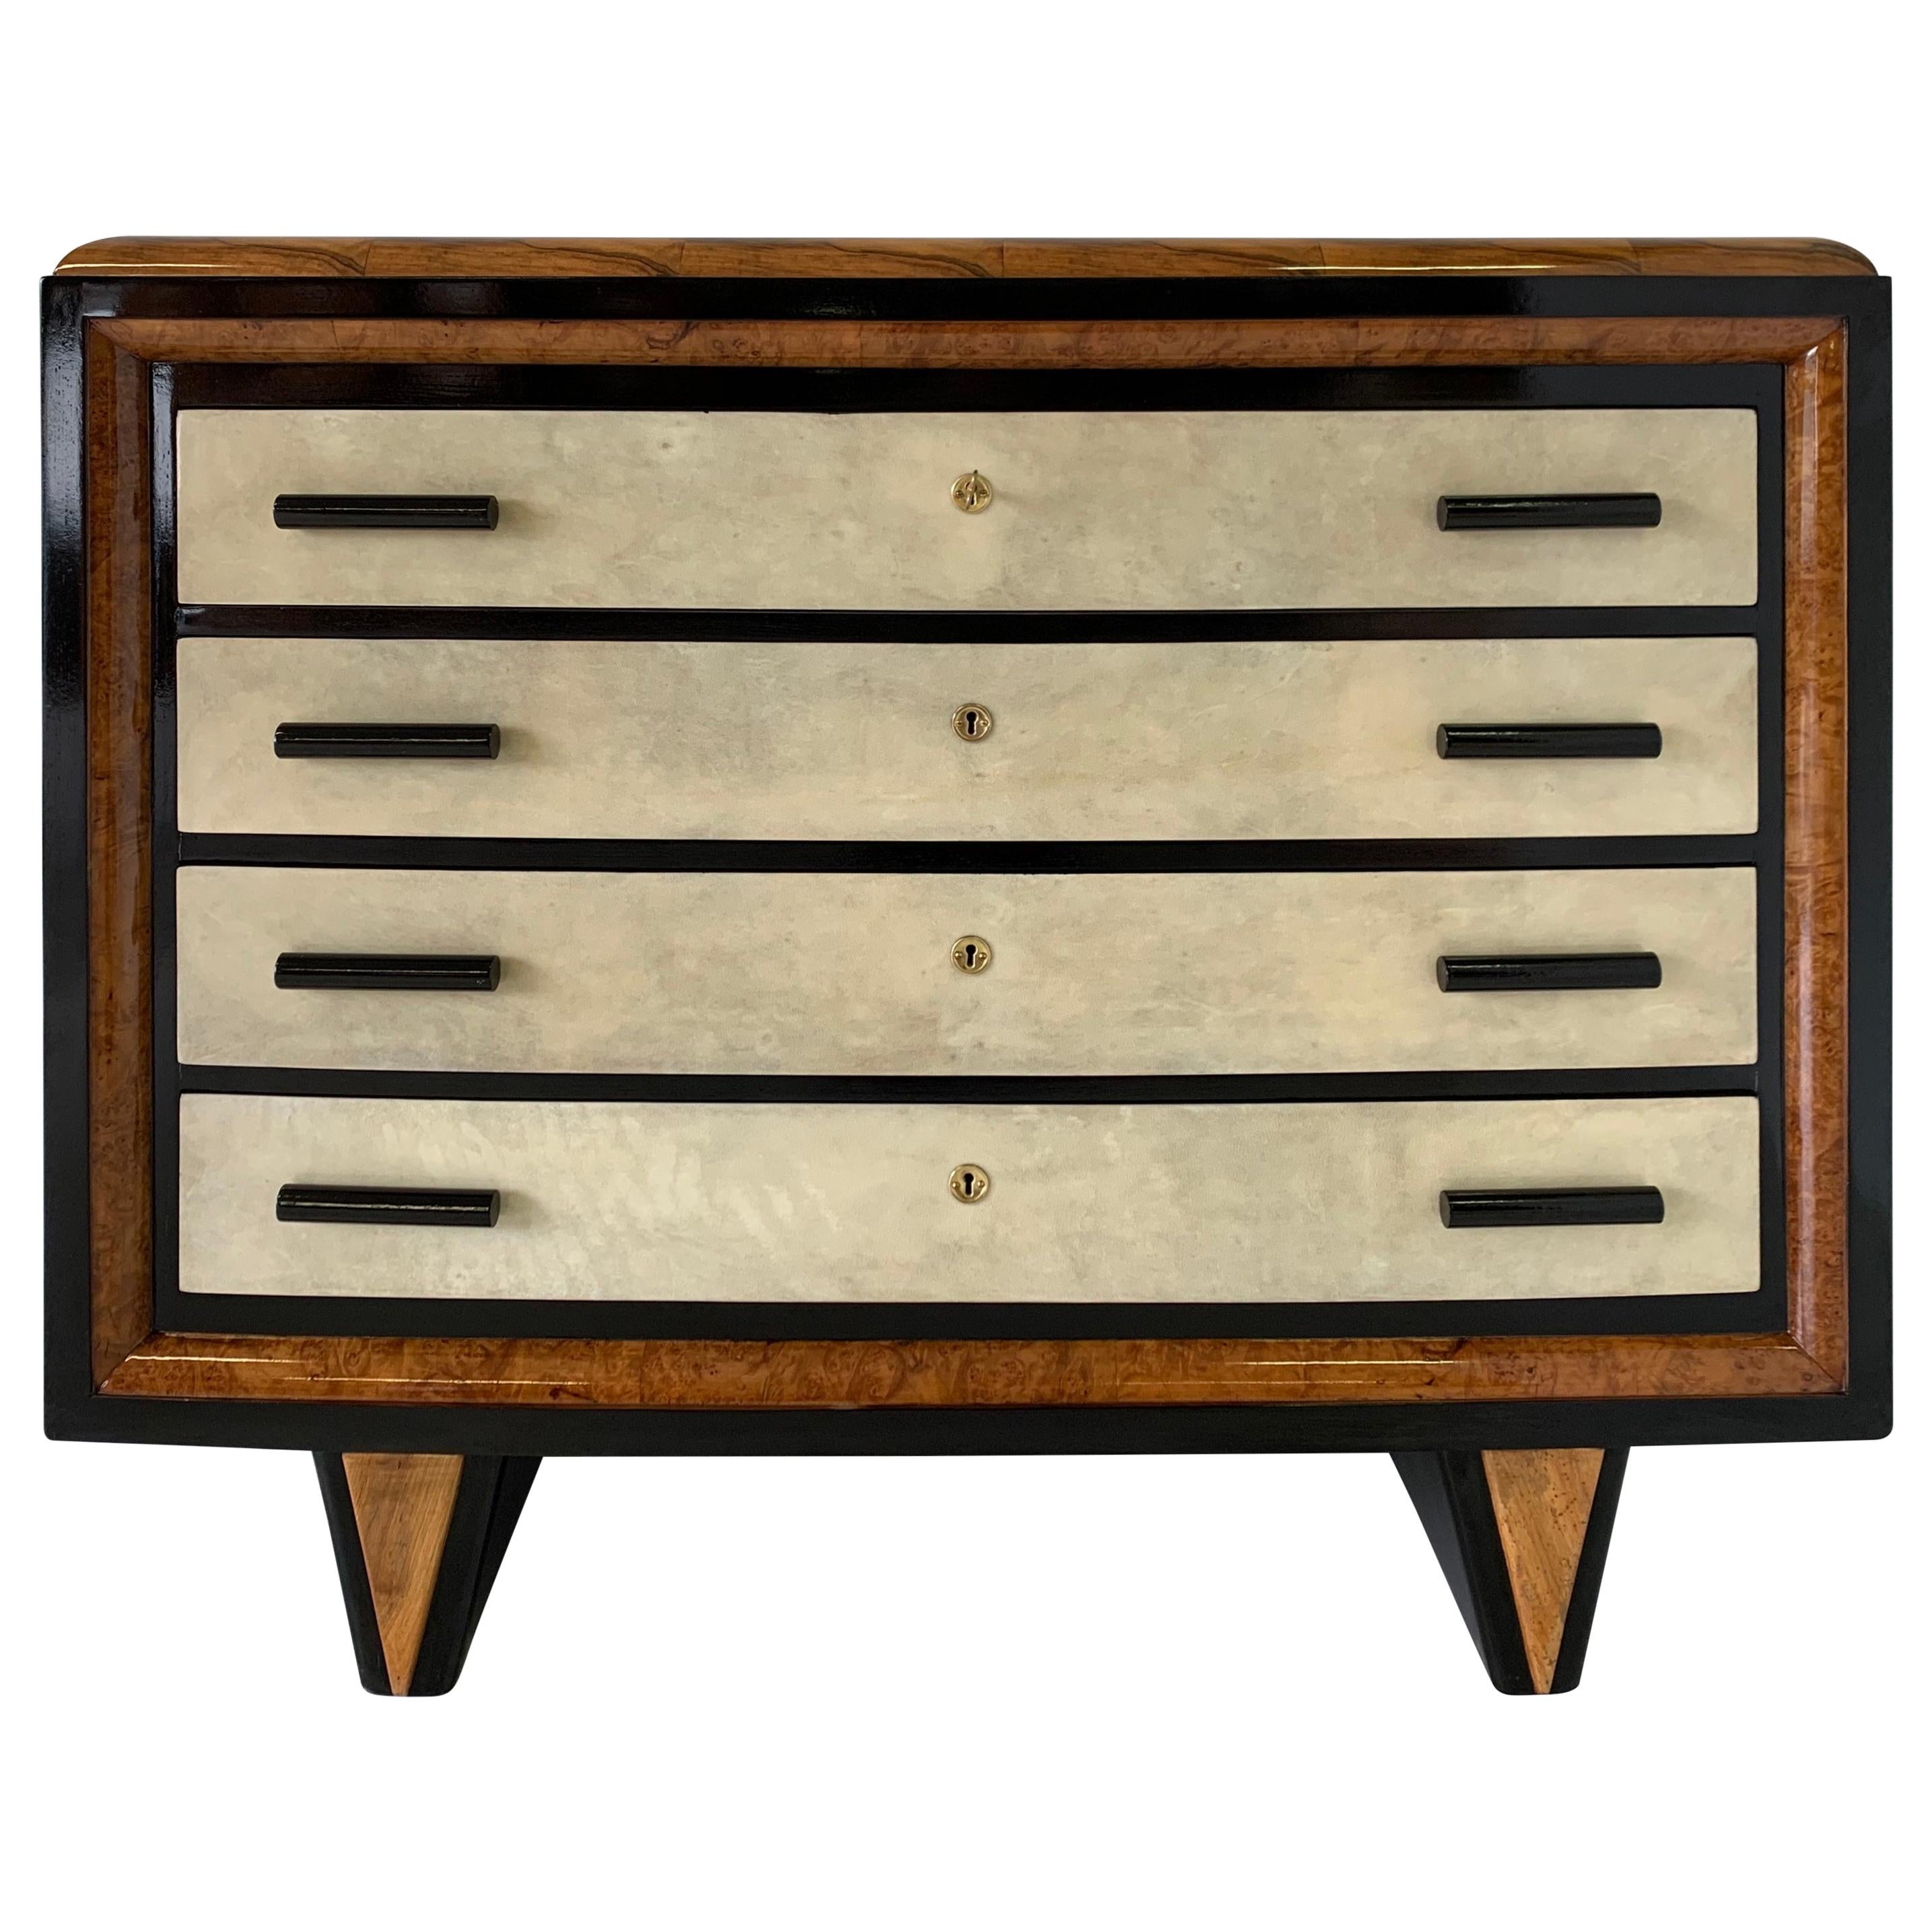 Italian Art Deco Parchment, Walnut and Black Chest of Drawers, 1930s